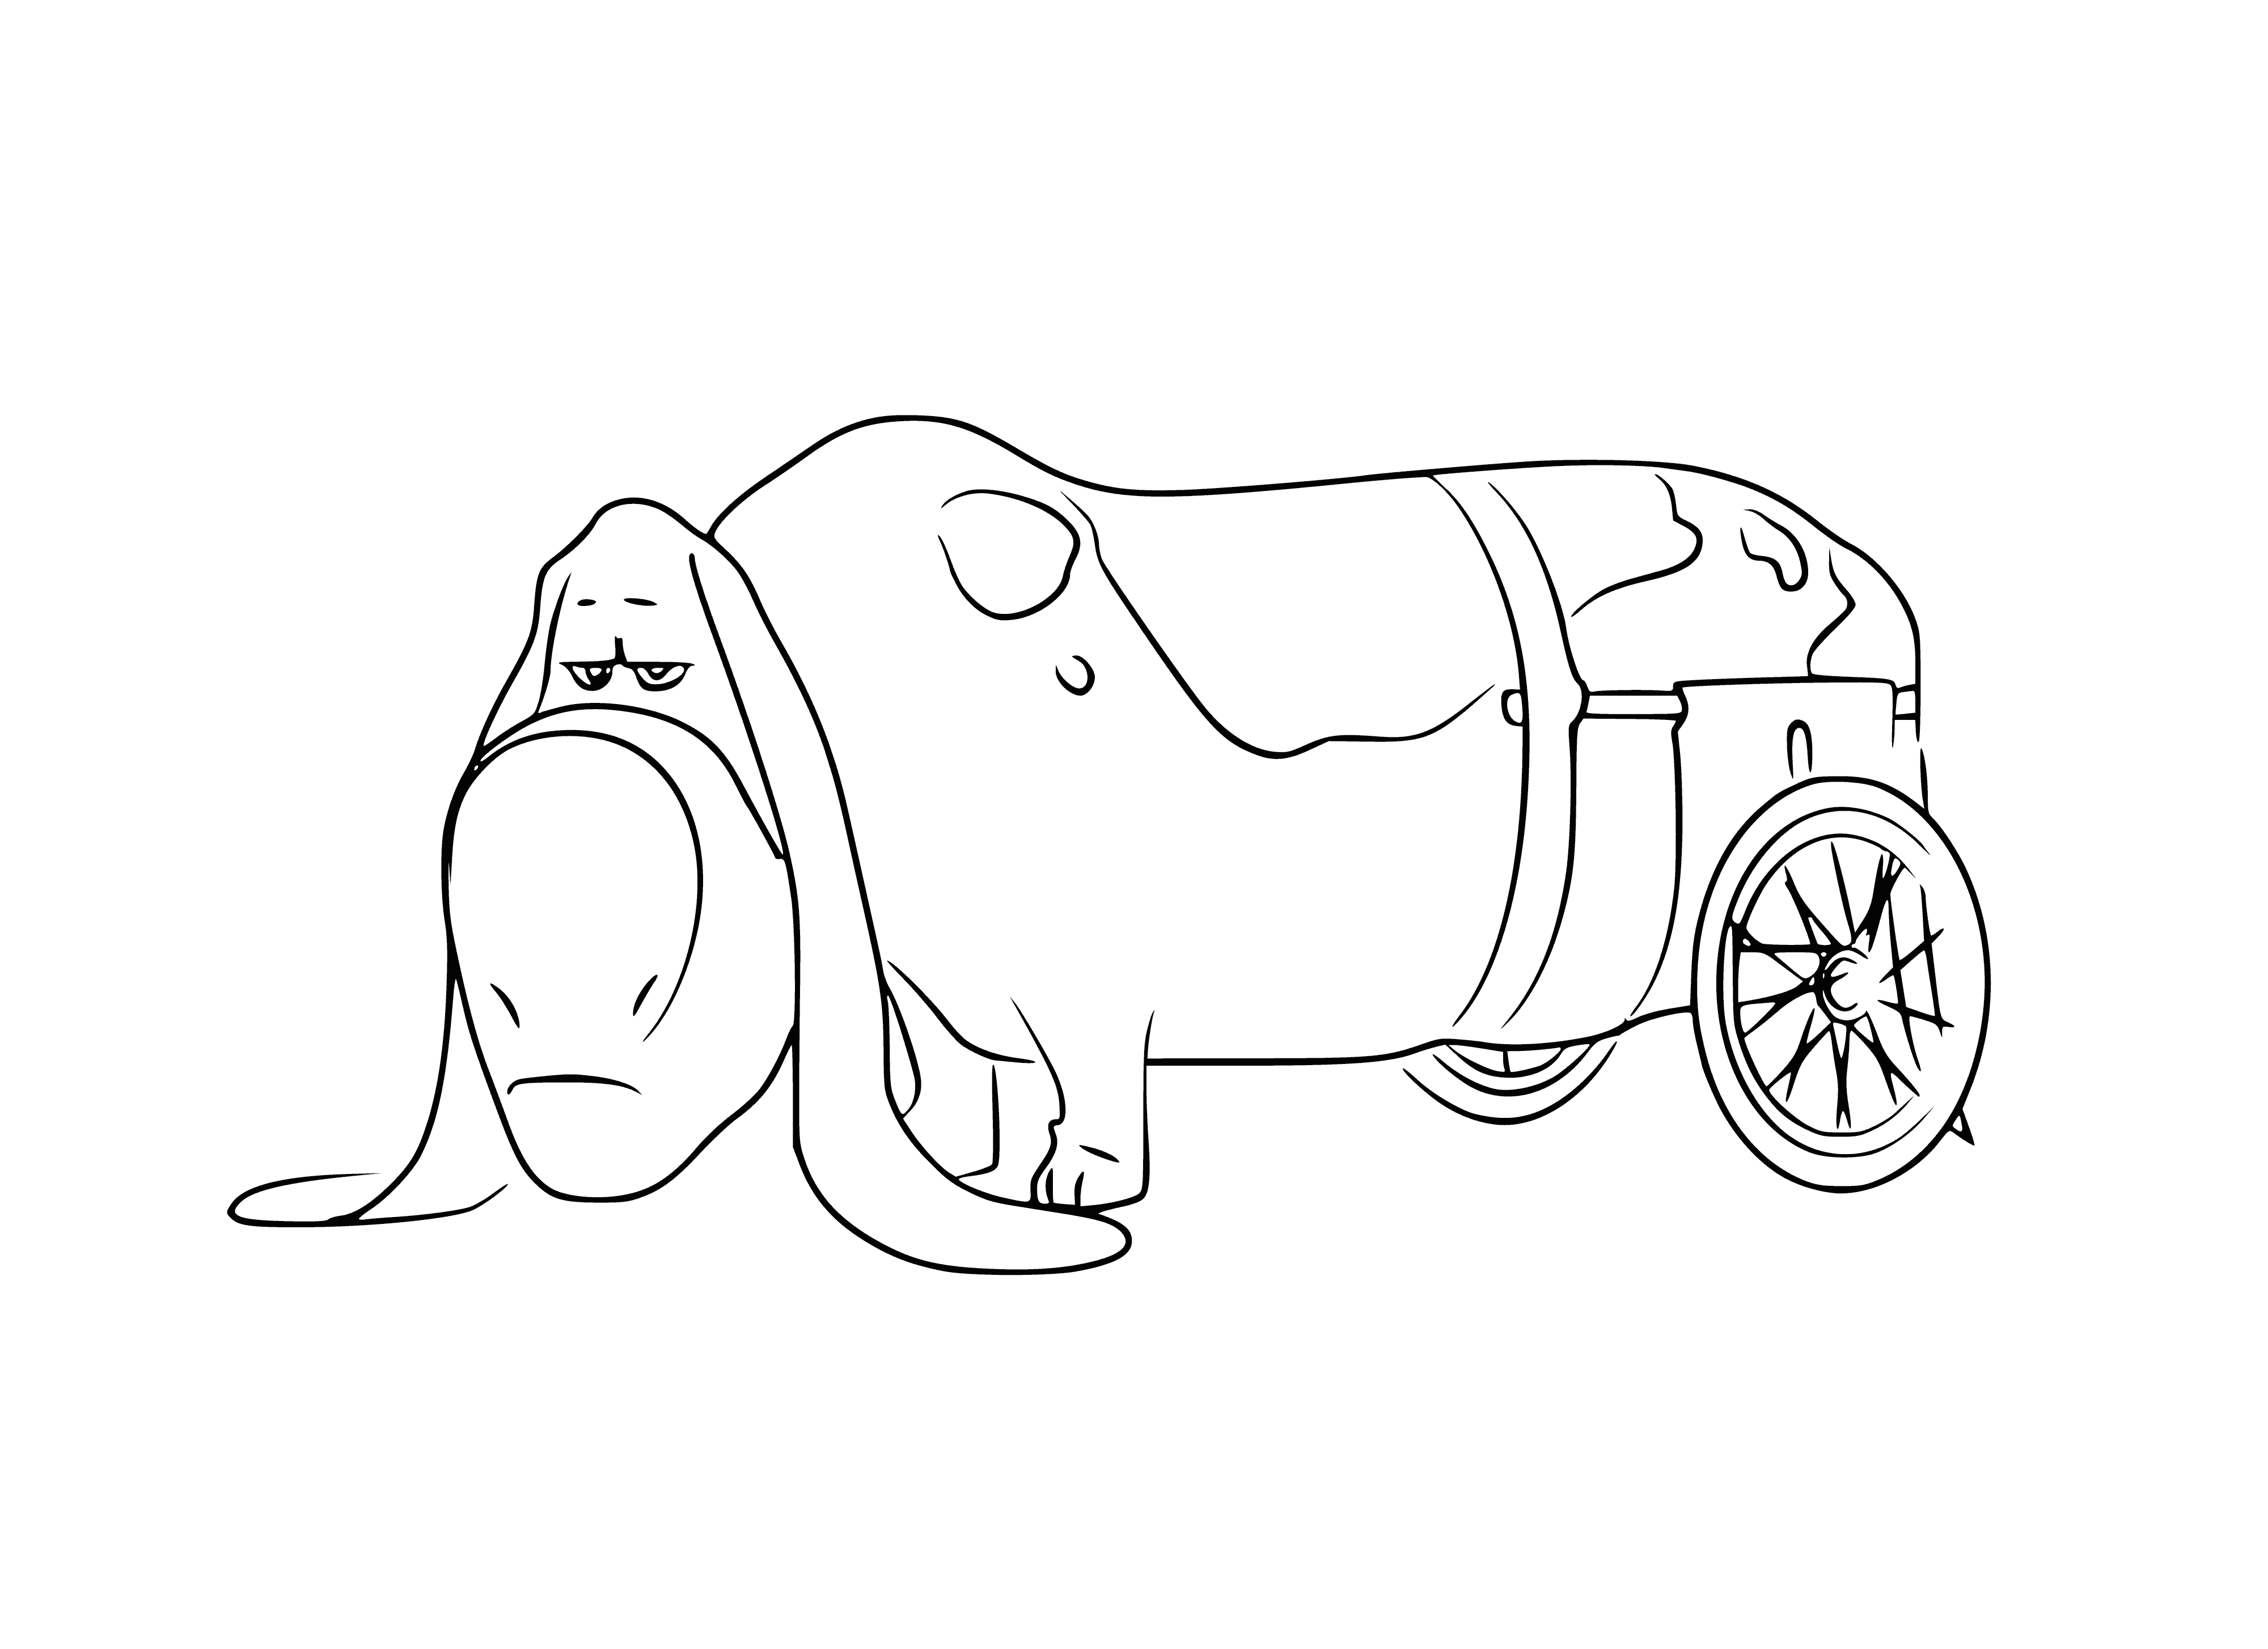 coloring page: Basset Hound happily licks ice cream cone; white ice cream and pink tongue, black collar w/ silver tag and floppy ears.